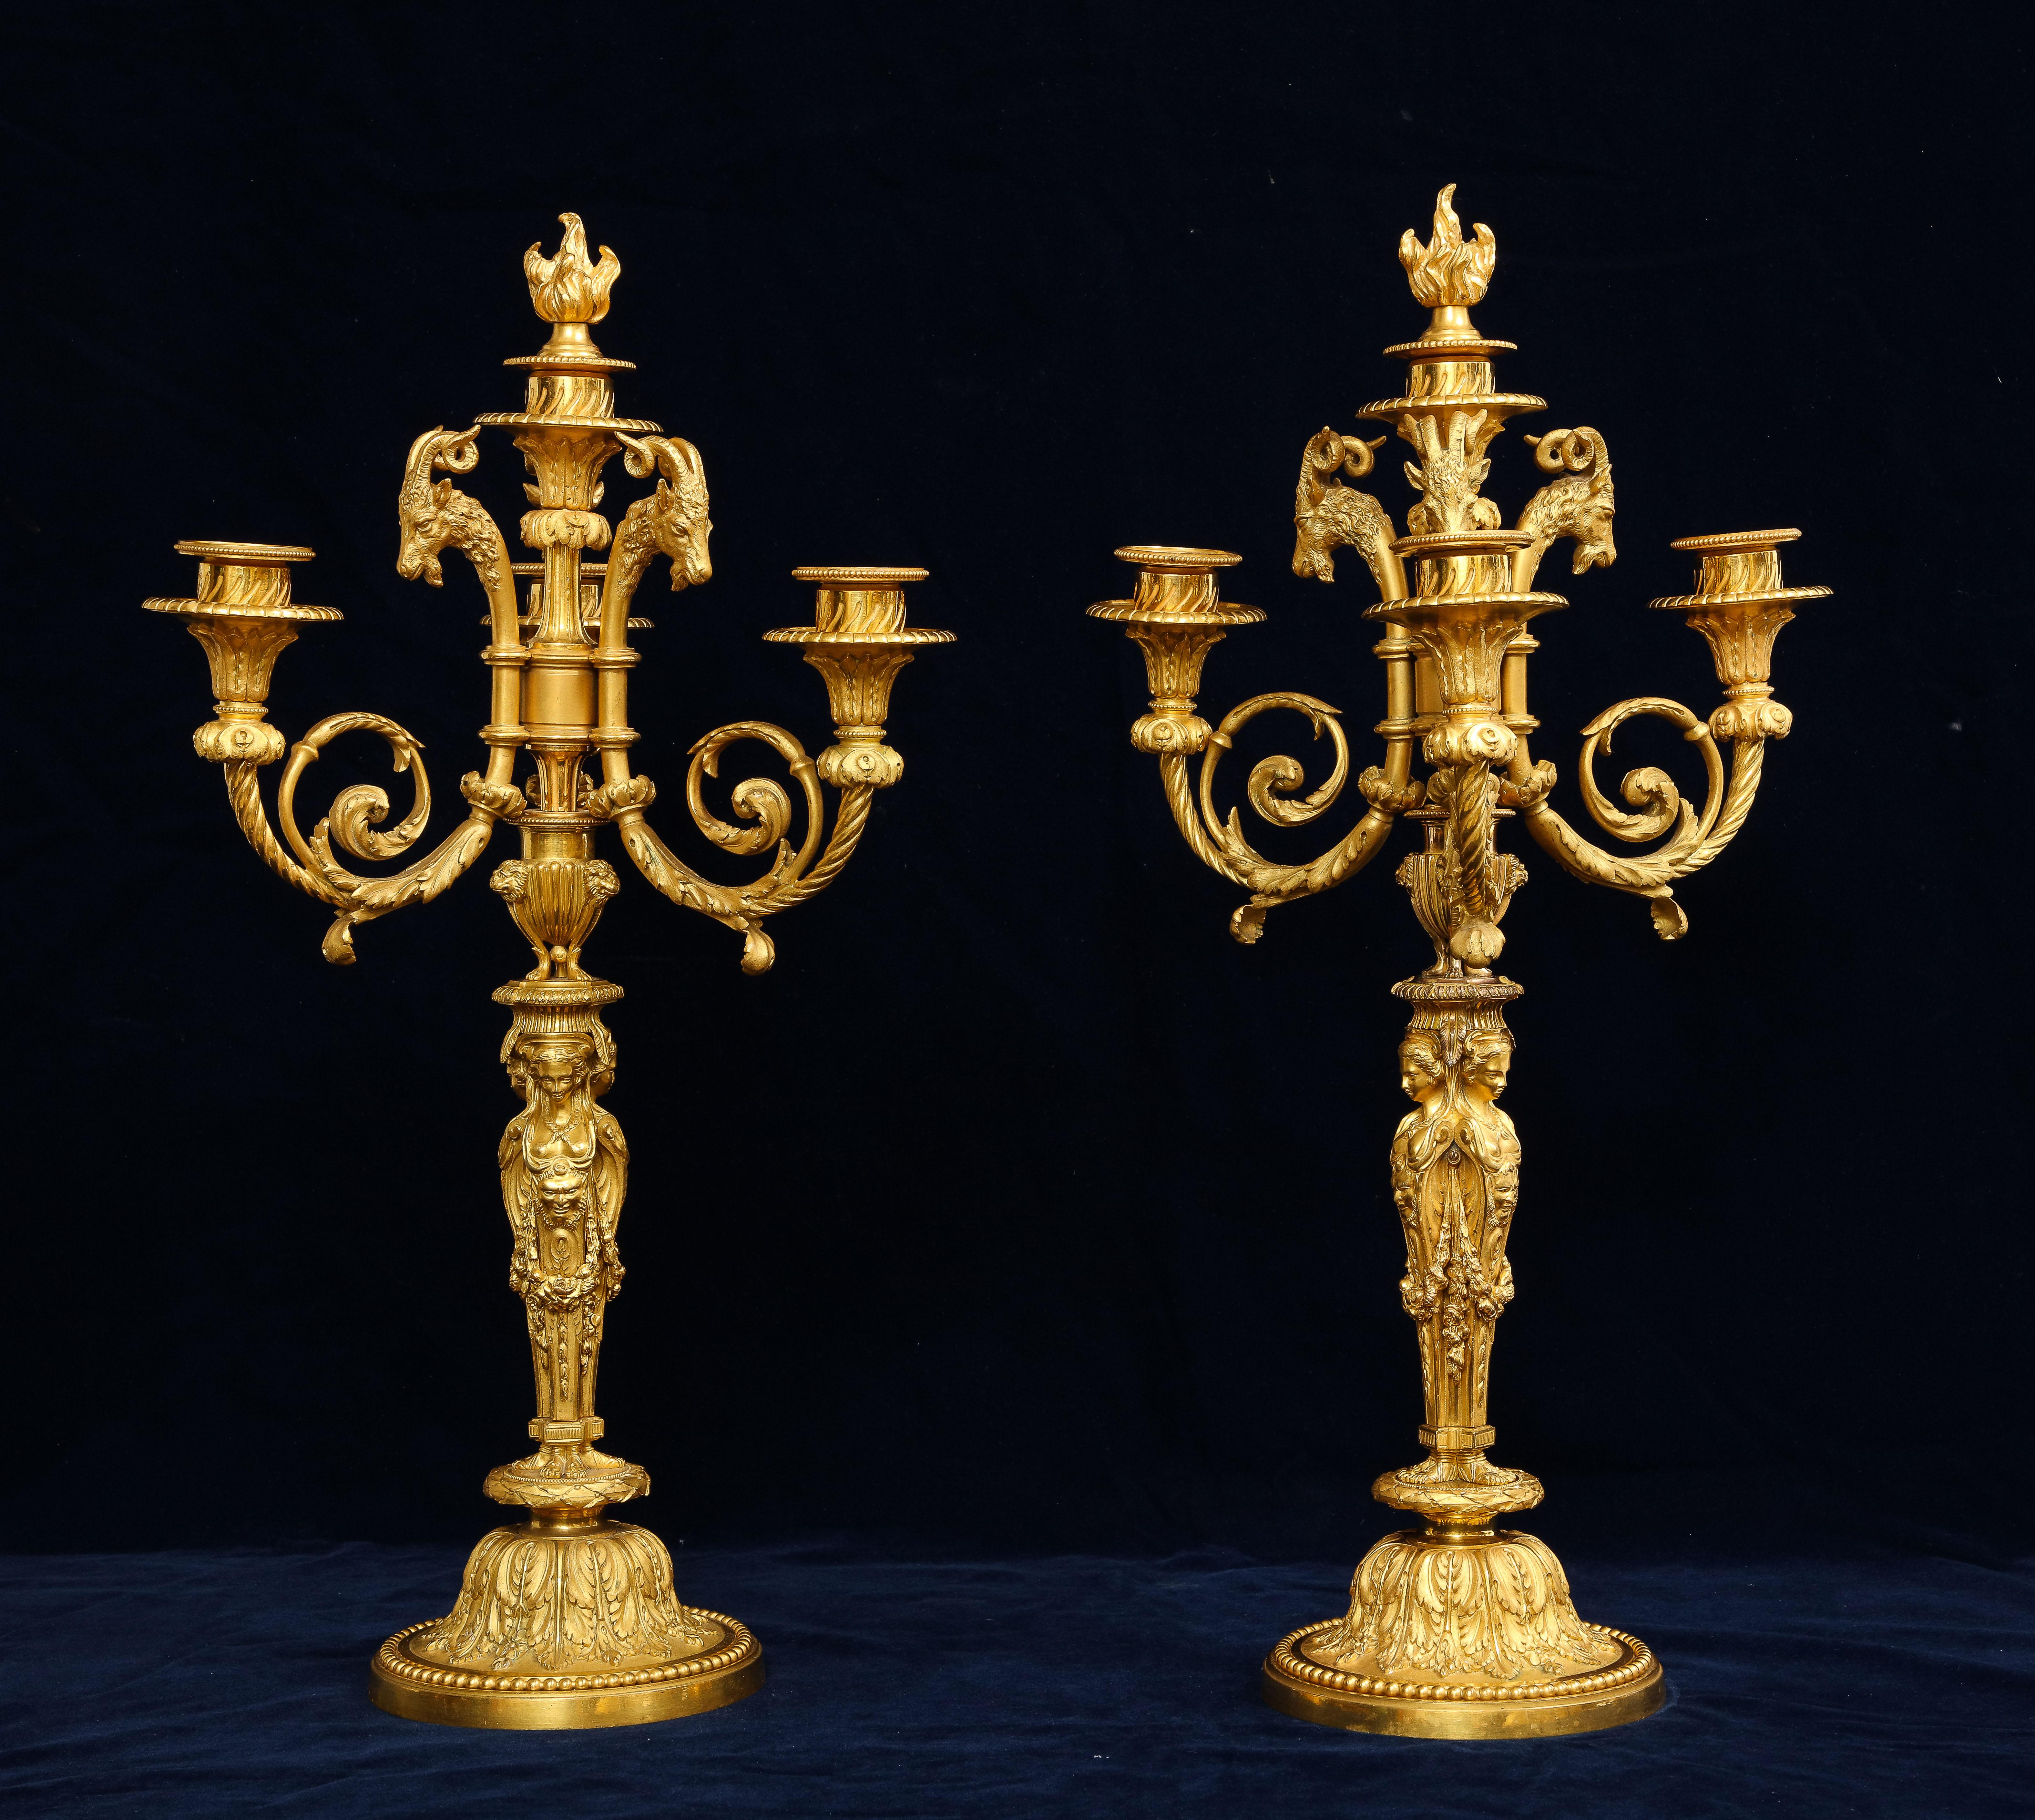 A fabulous pair of French 19th century ormolu figural four light candelabras, after a model by Pierre Gouthiere, After a Design by Jean-Demosthene Dugourc. Each stem with caryatids issuing scrolled branches terminating in marvelous dore bronze